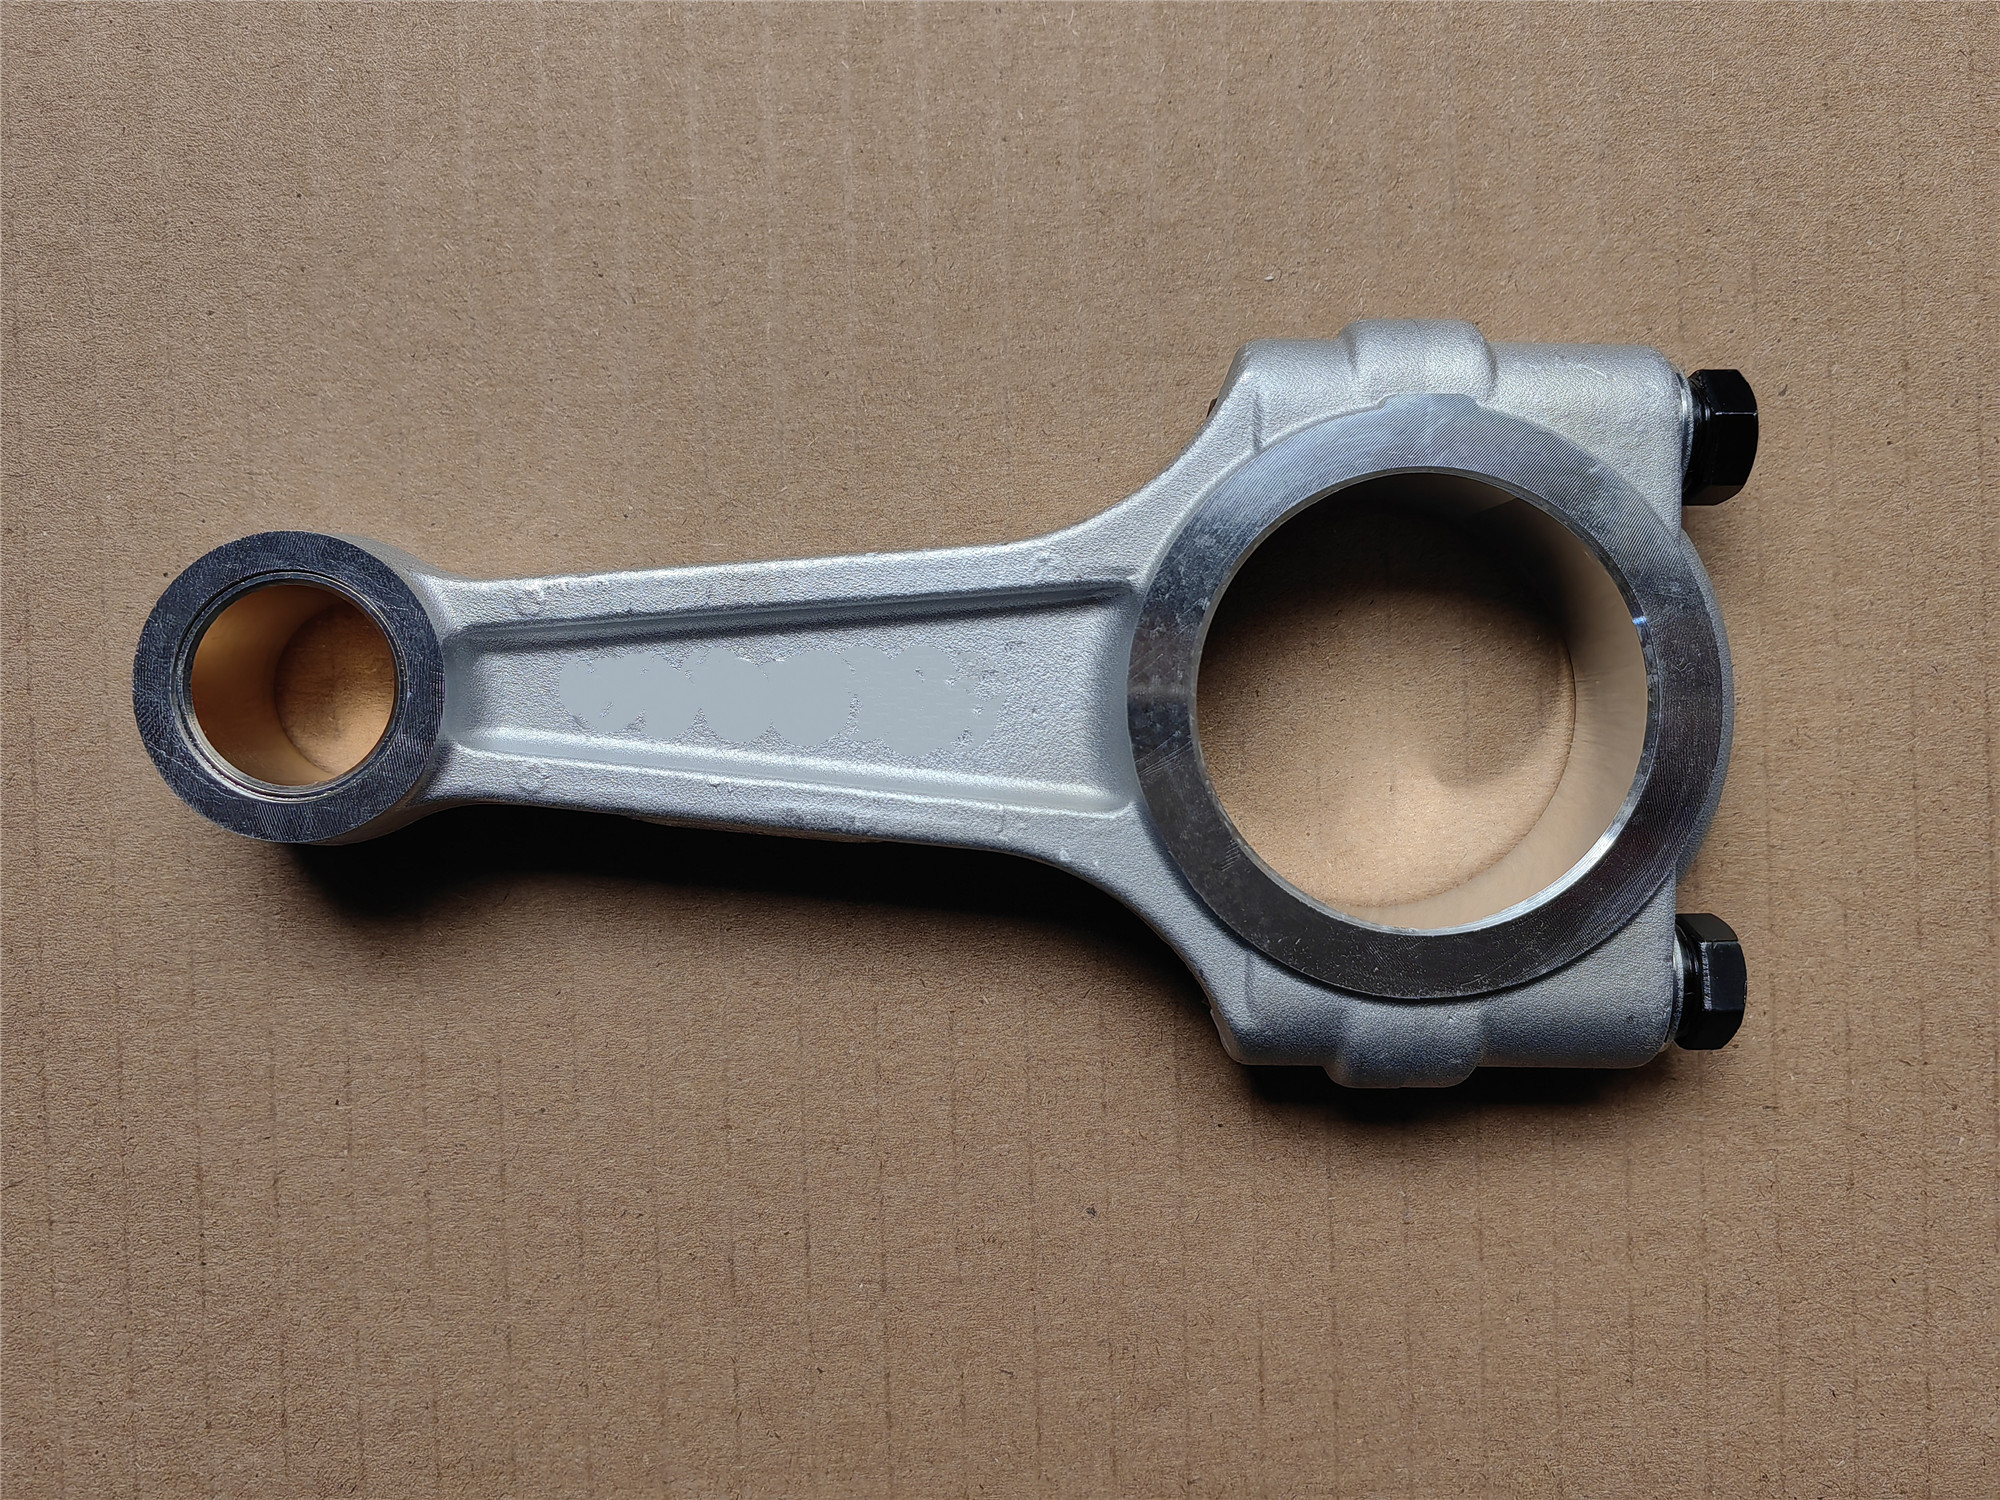 This universal connecting rod is used for Bitzer model 4H, 4G,6H, 6G, and 6F semi-hermetic compressors with oil pumps.